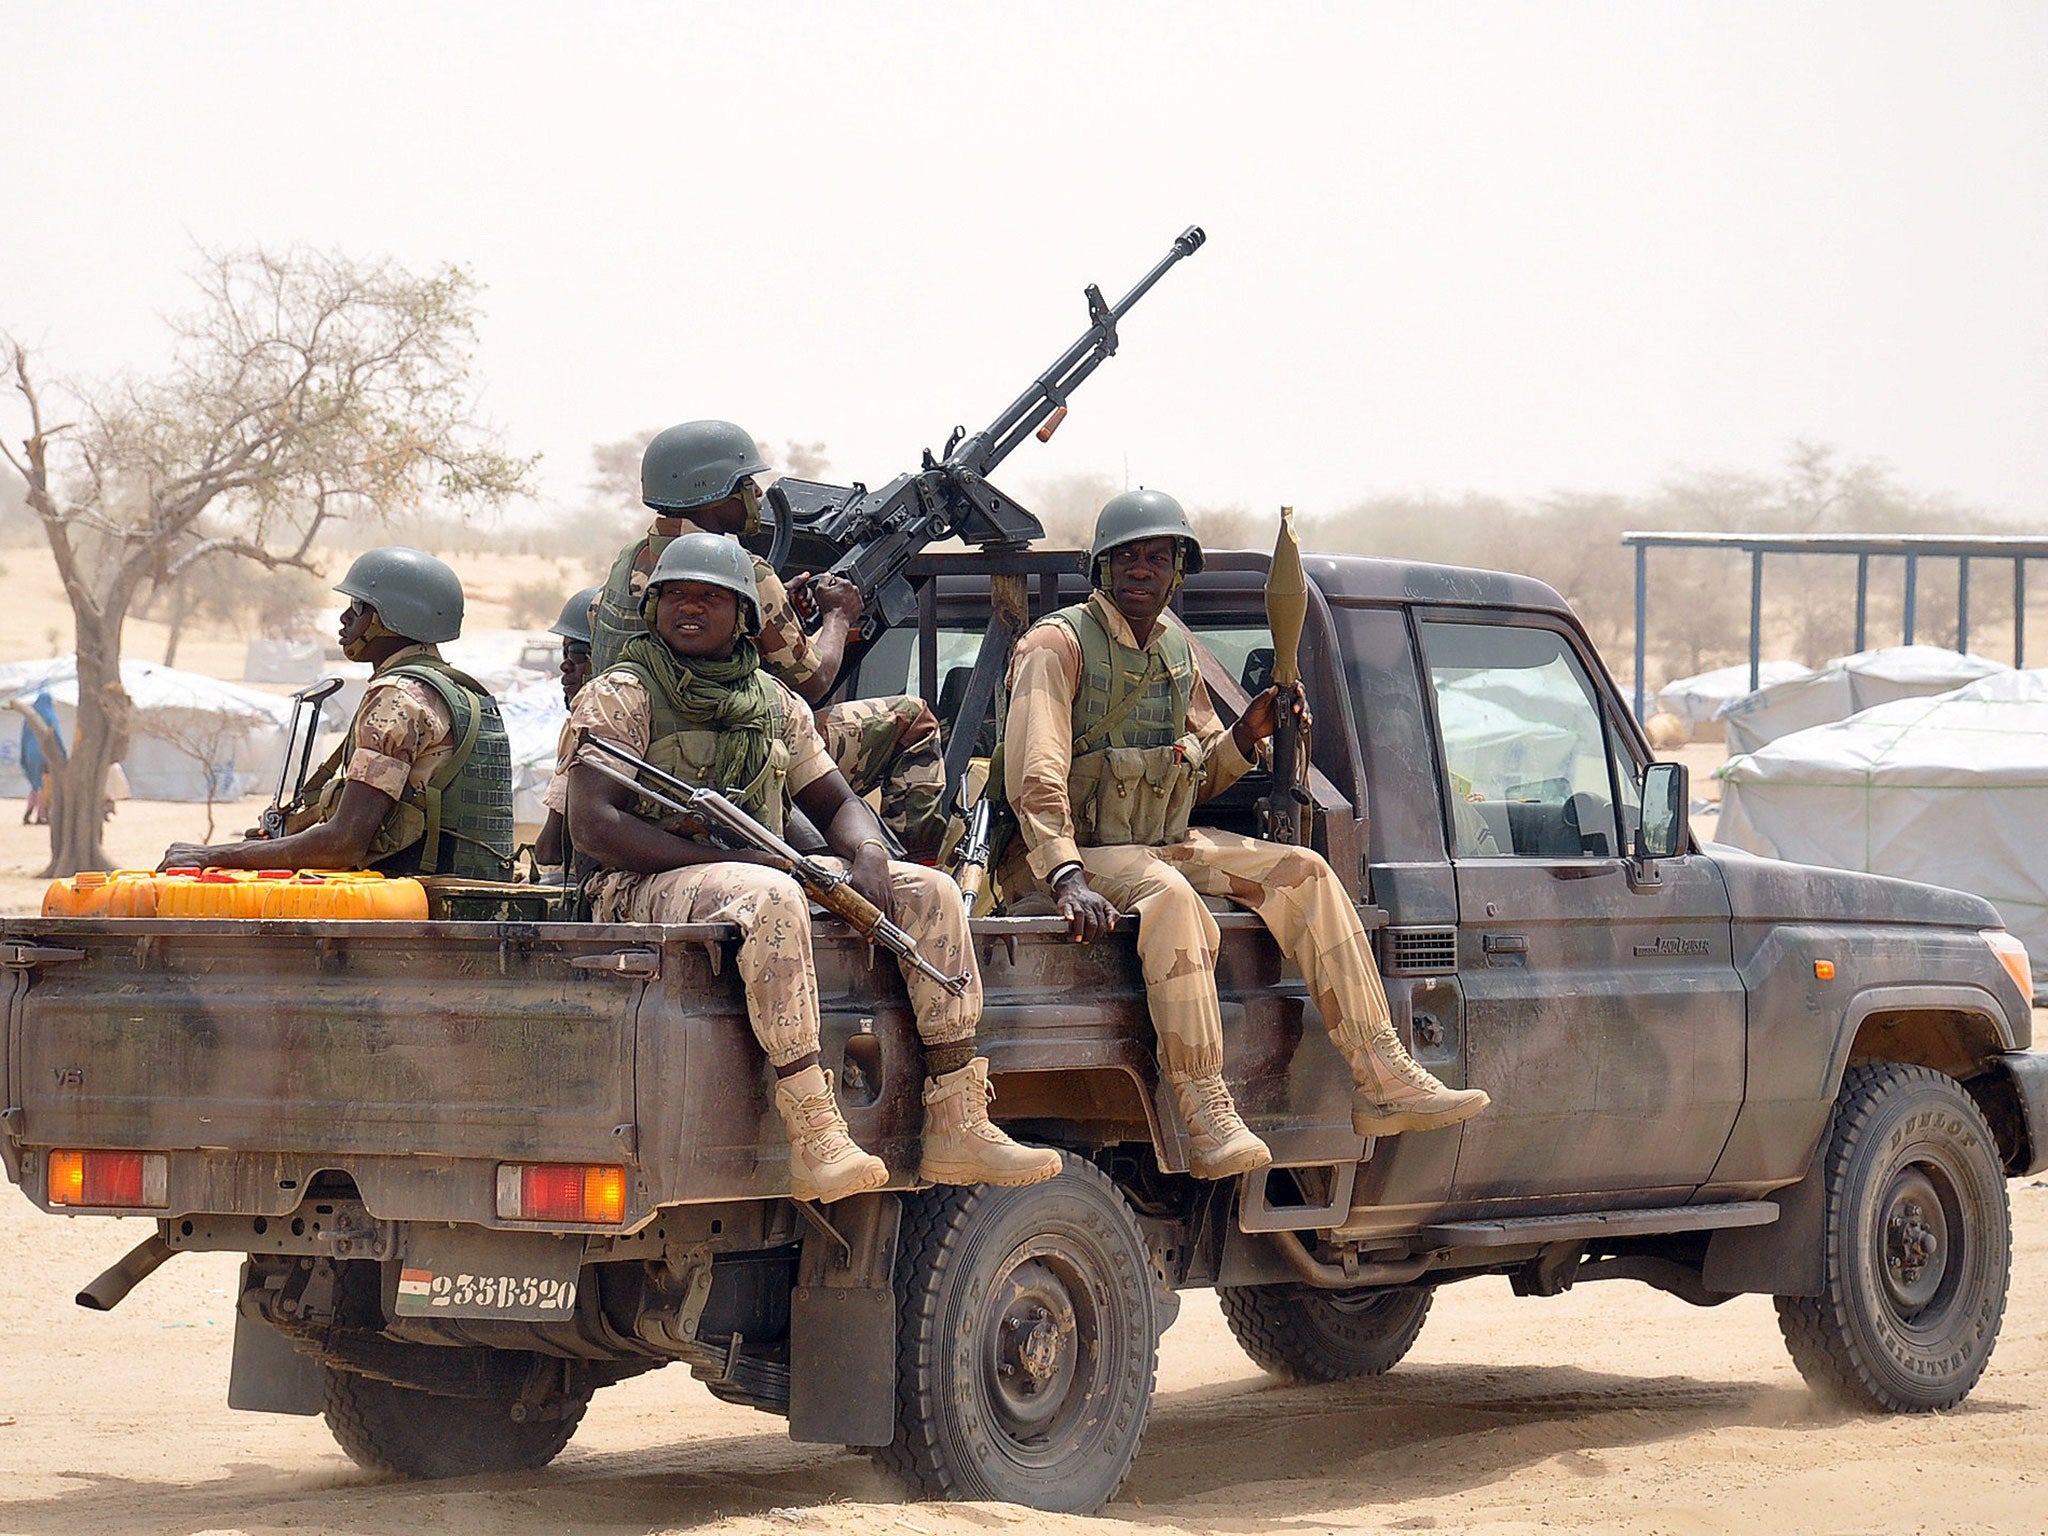 Brigadier General Rabe Abubakar said 'about 800 of the Boko Haram members have surrendered to the military'